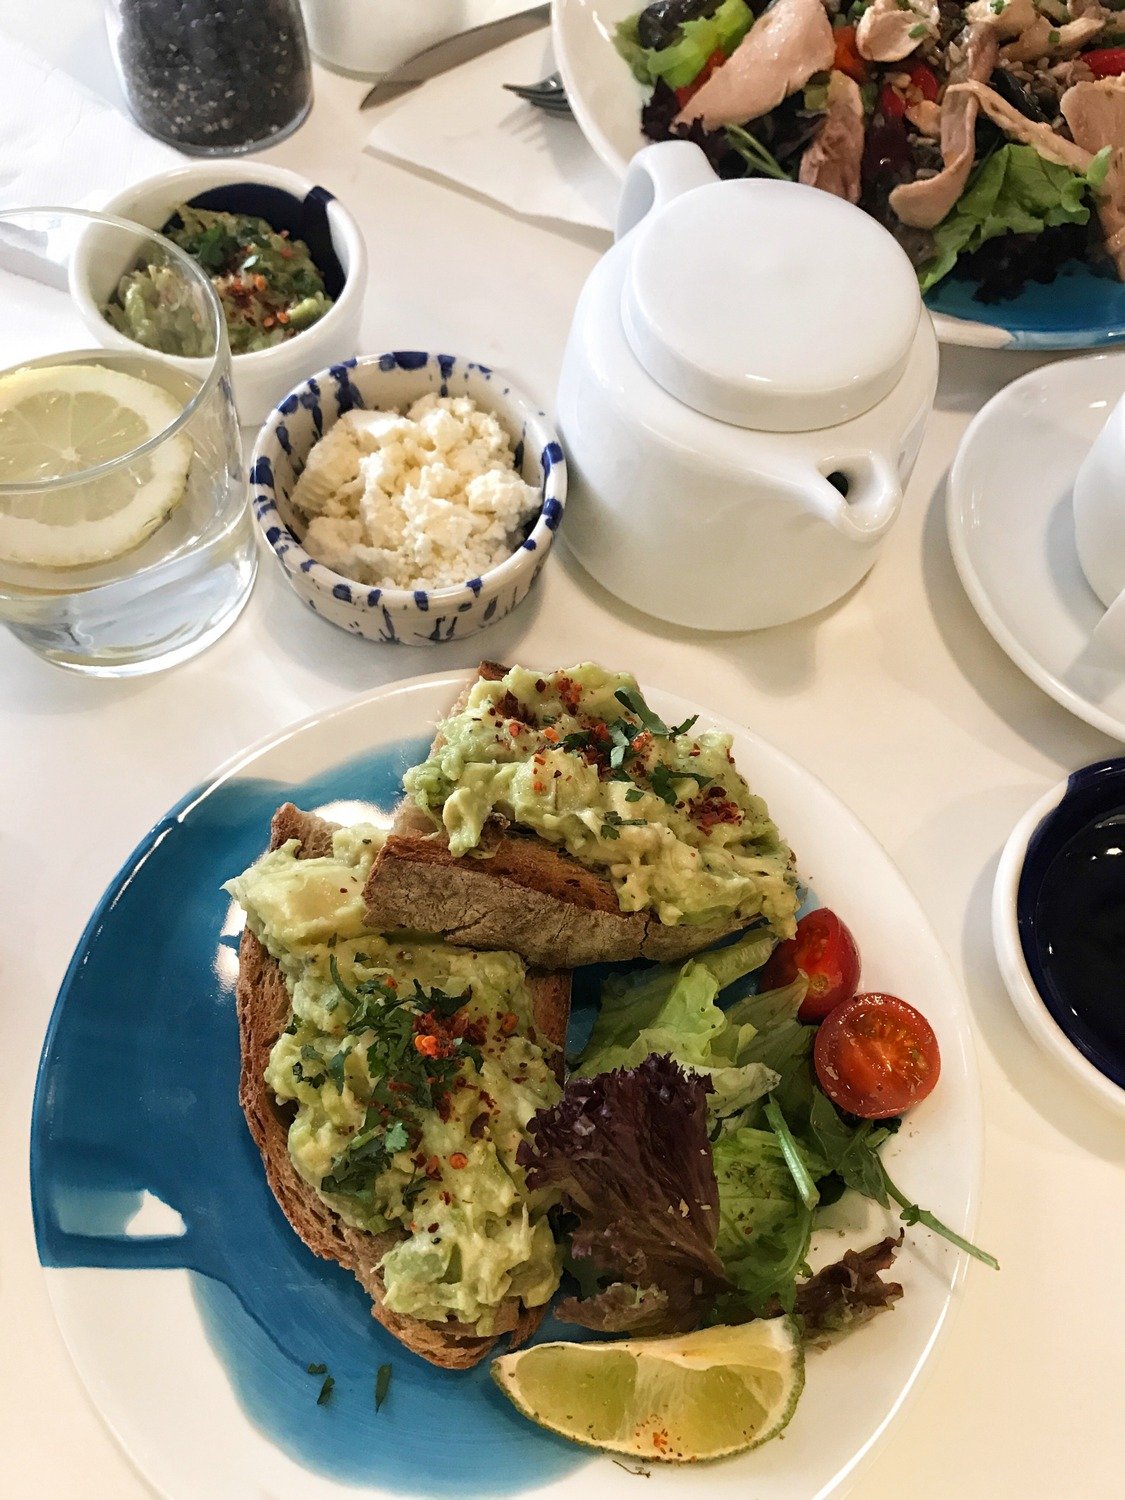 Smashed avocado on sourdough bread at The Mill Lisbon